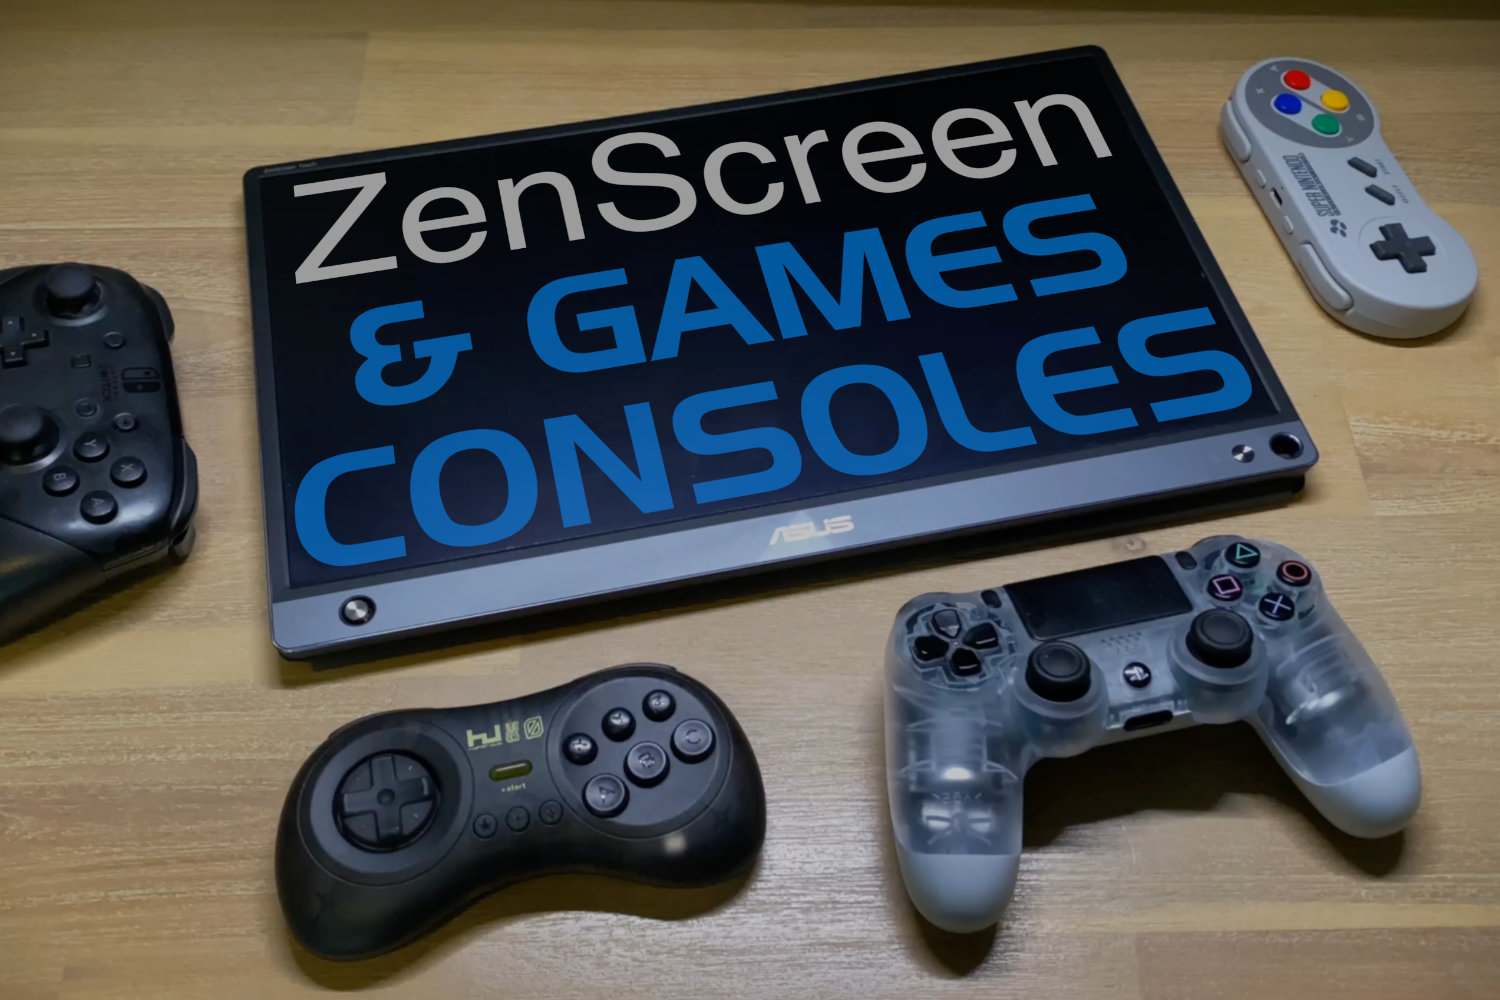 Games consoles working on the ZenScreen ASUS Touch Follow Up